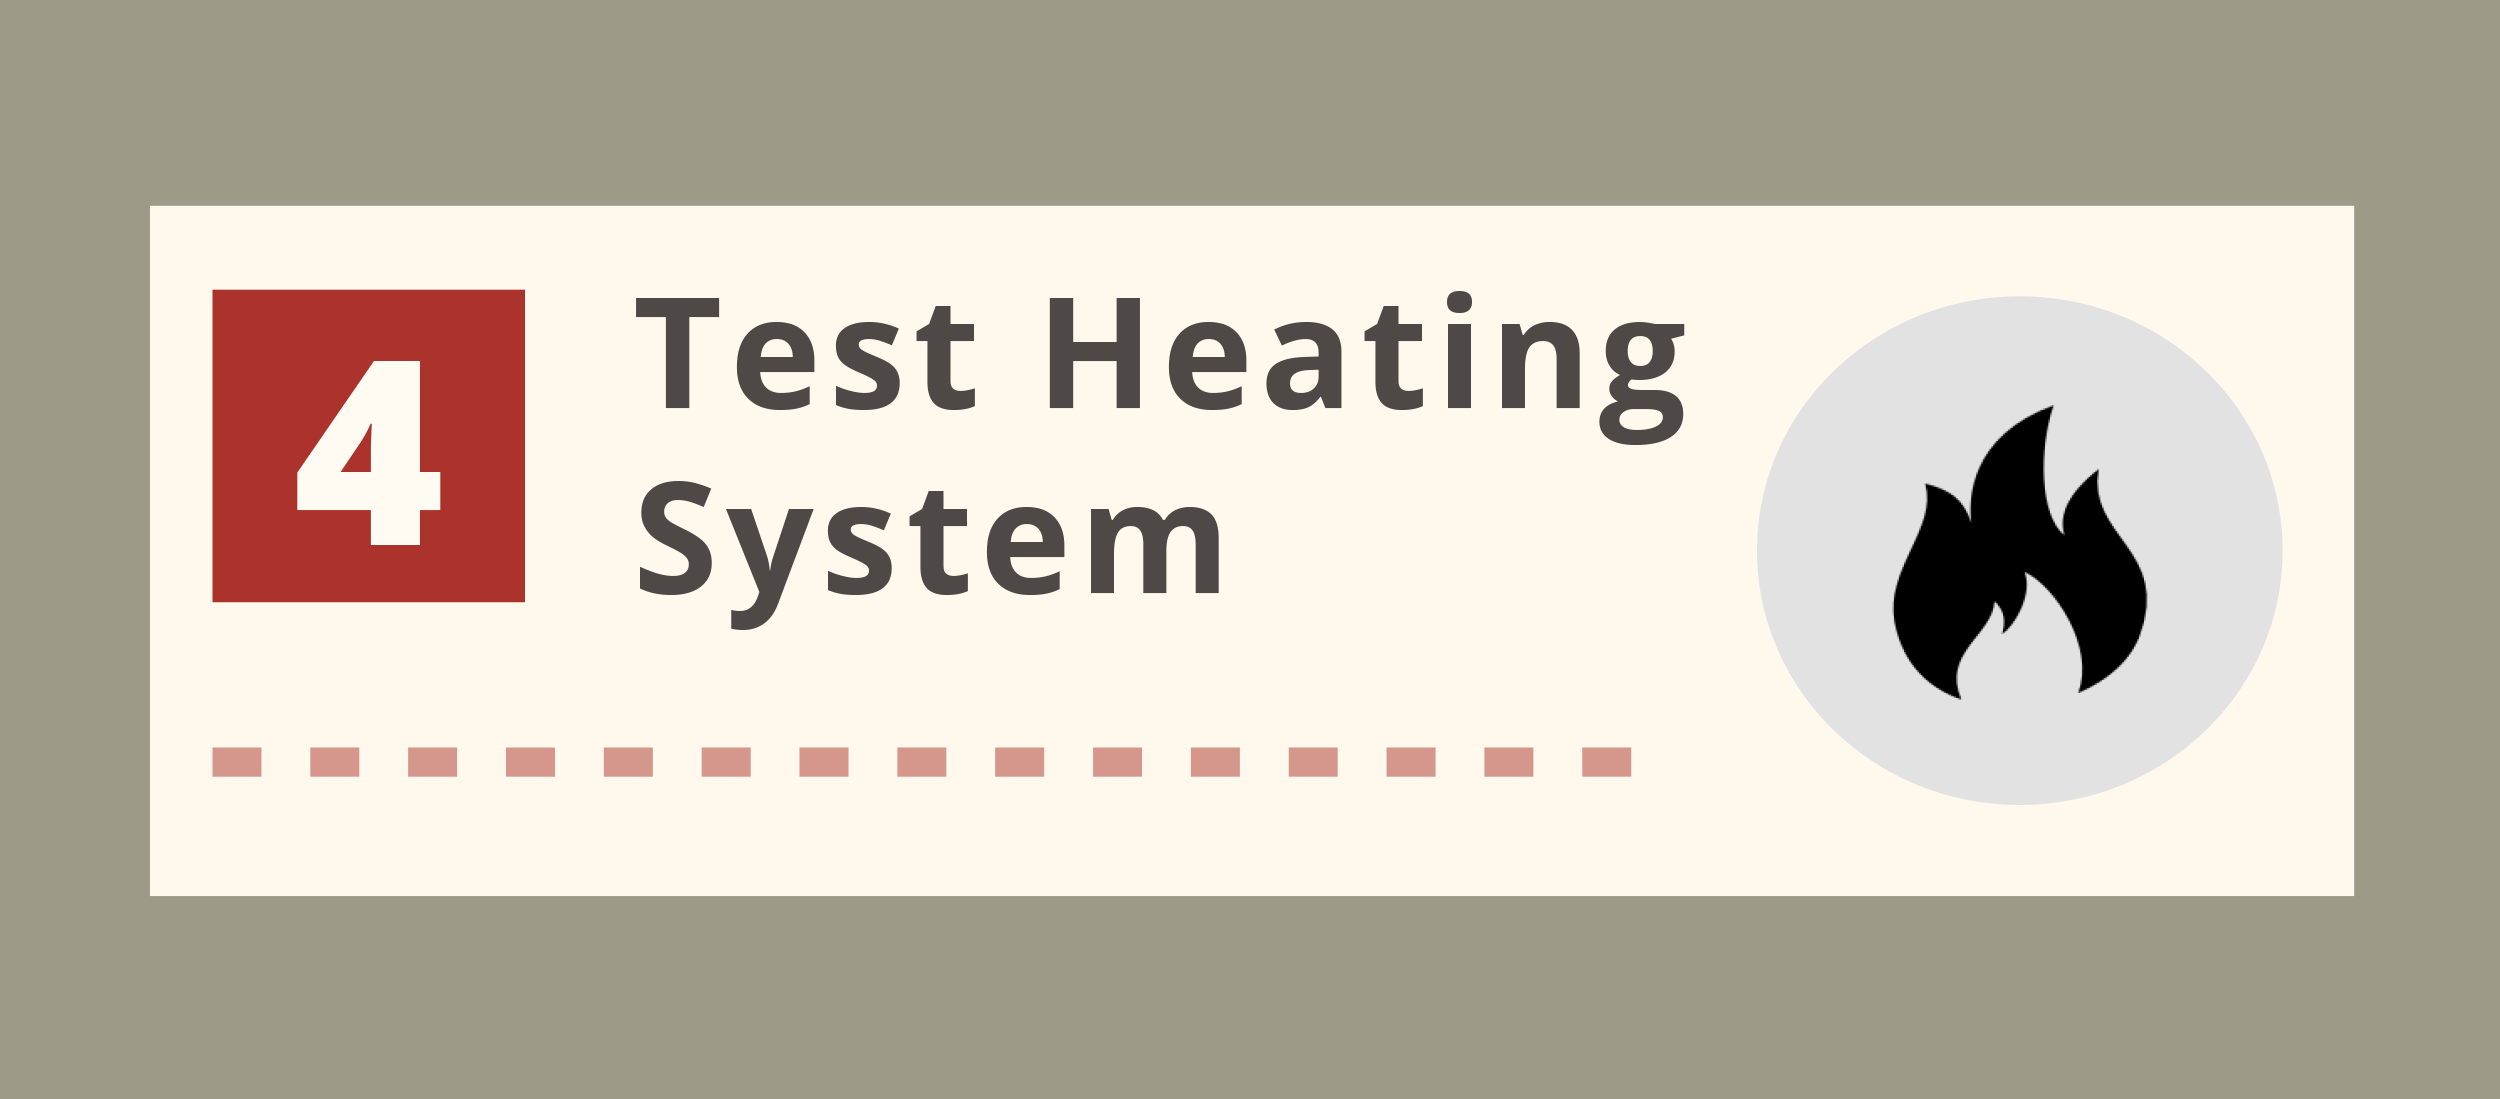 Test Heating System